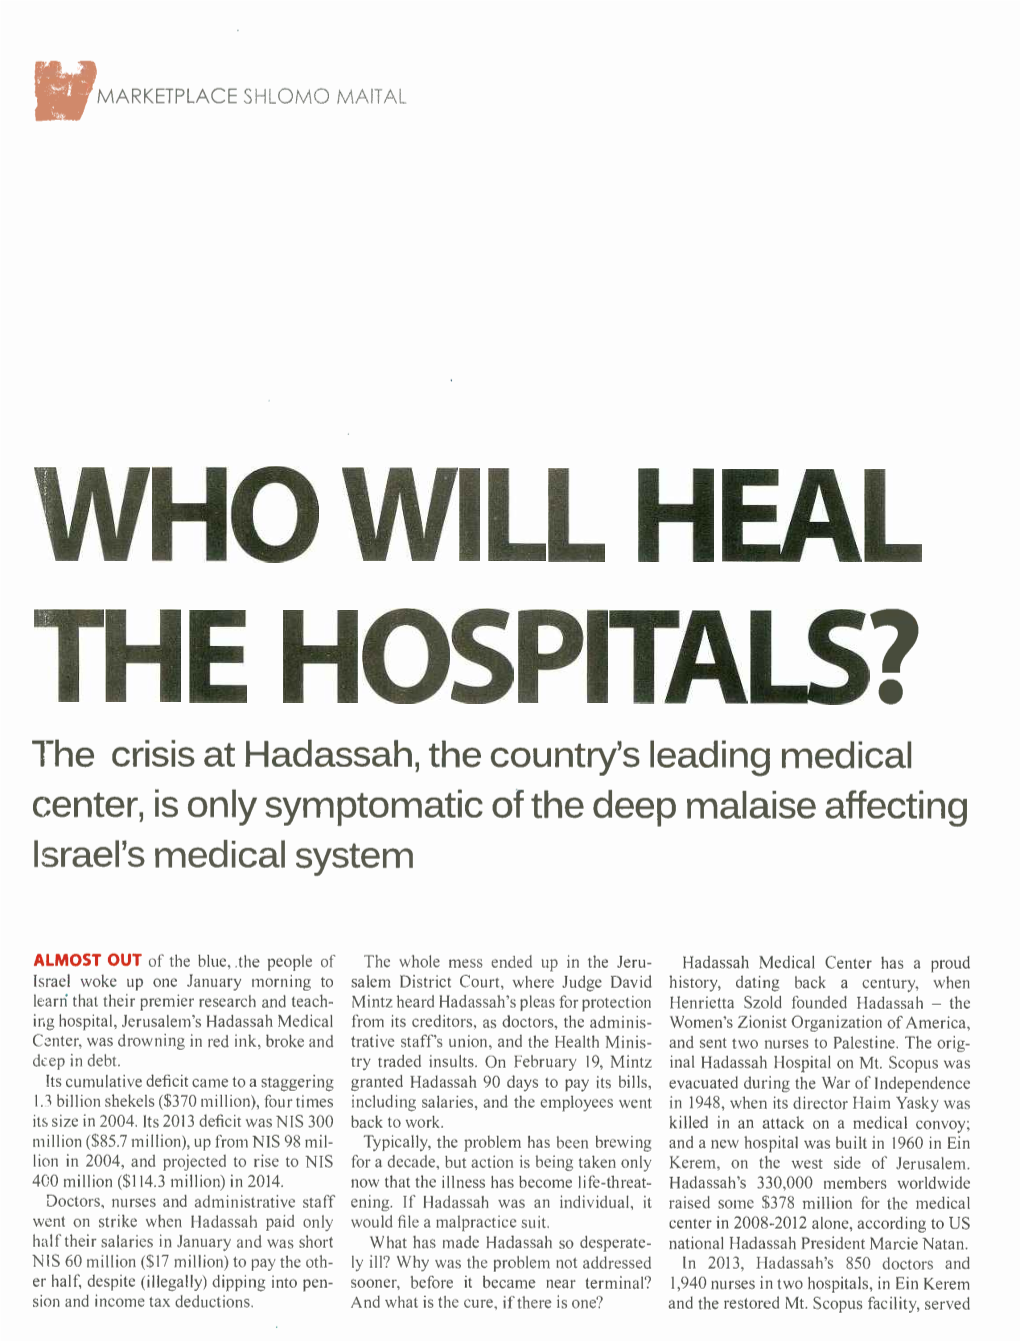 Who Will Heal the Hospitals.Pdf(727KB)